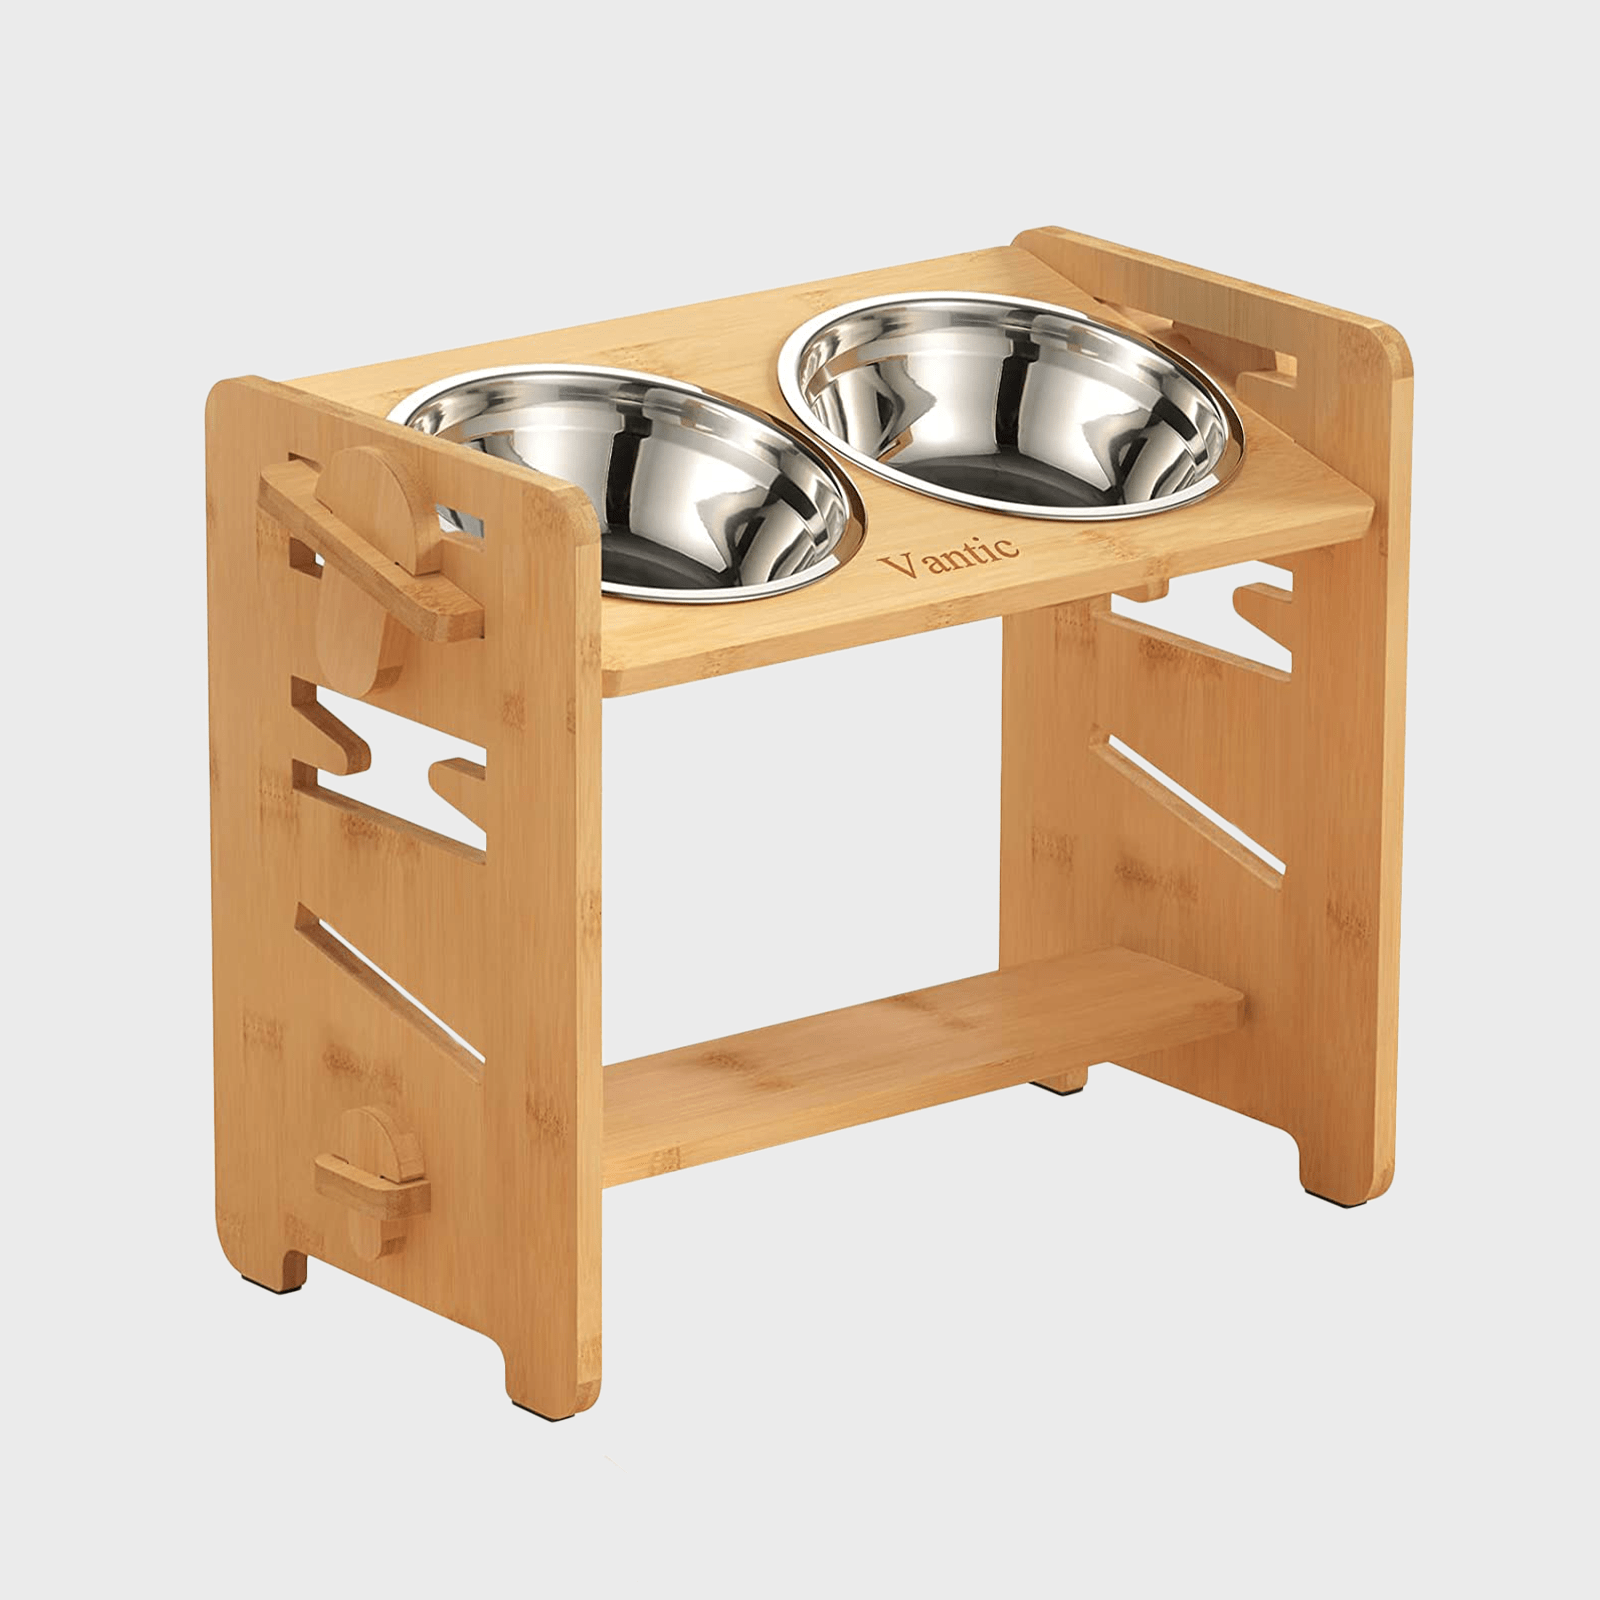 Dog Bowl adjustable stand with 2 steel bowl Big size-Good for